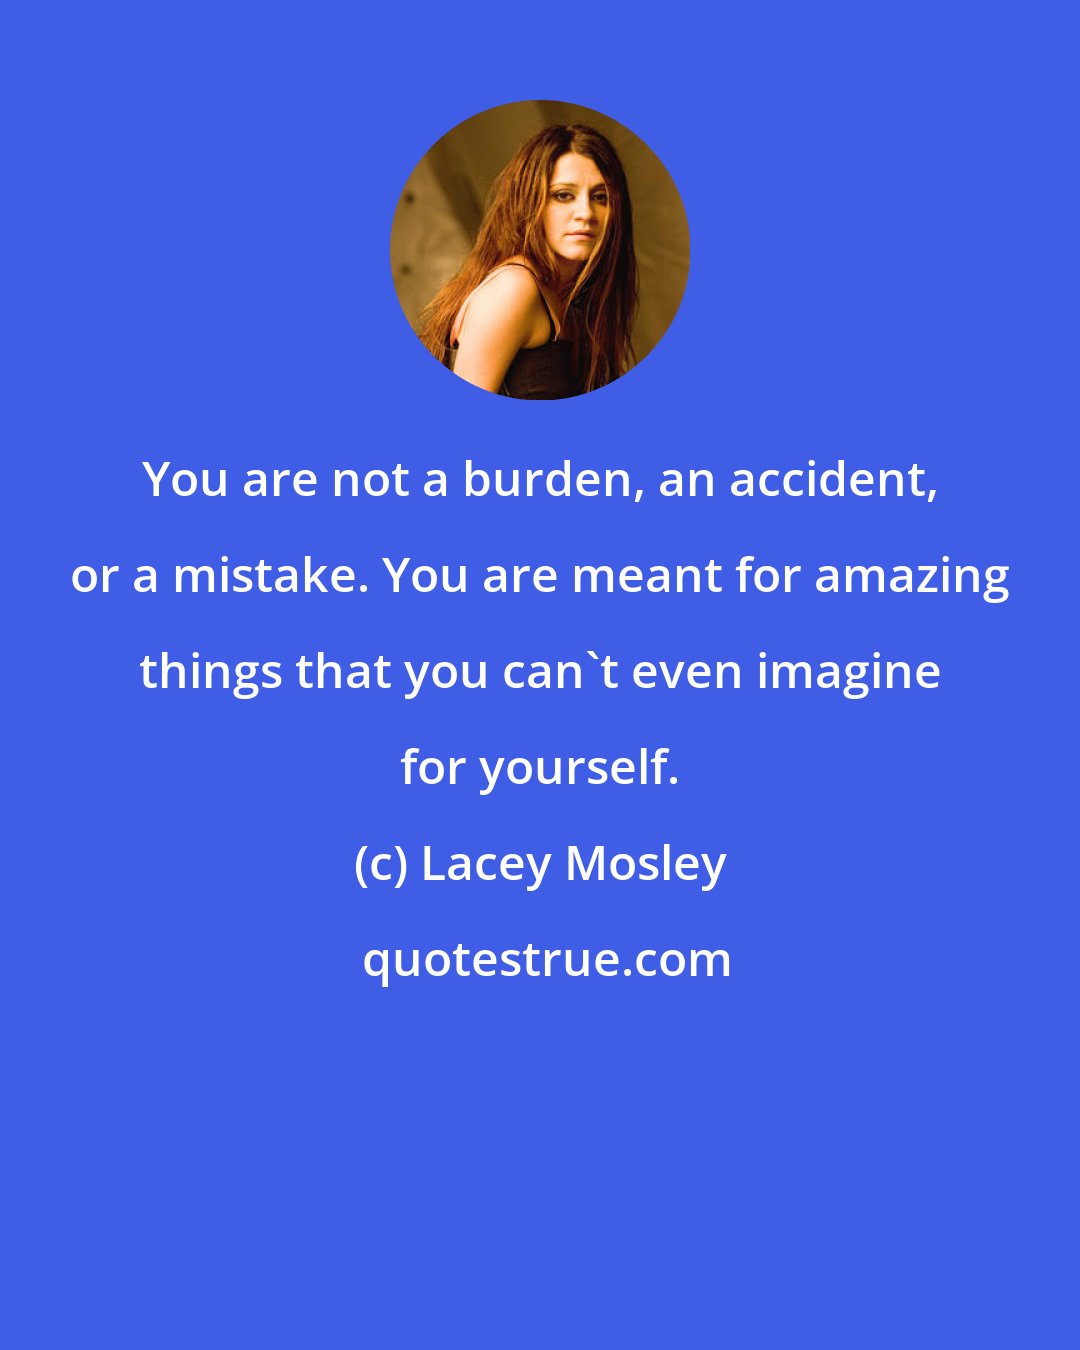 Lacey Mosley: You are not a burden, an accident, or a mistake. You are meant for amazing things that you can't even imagine for yourself.